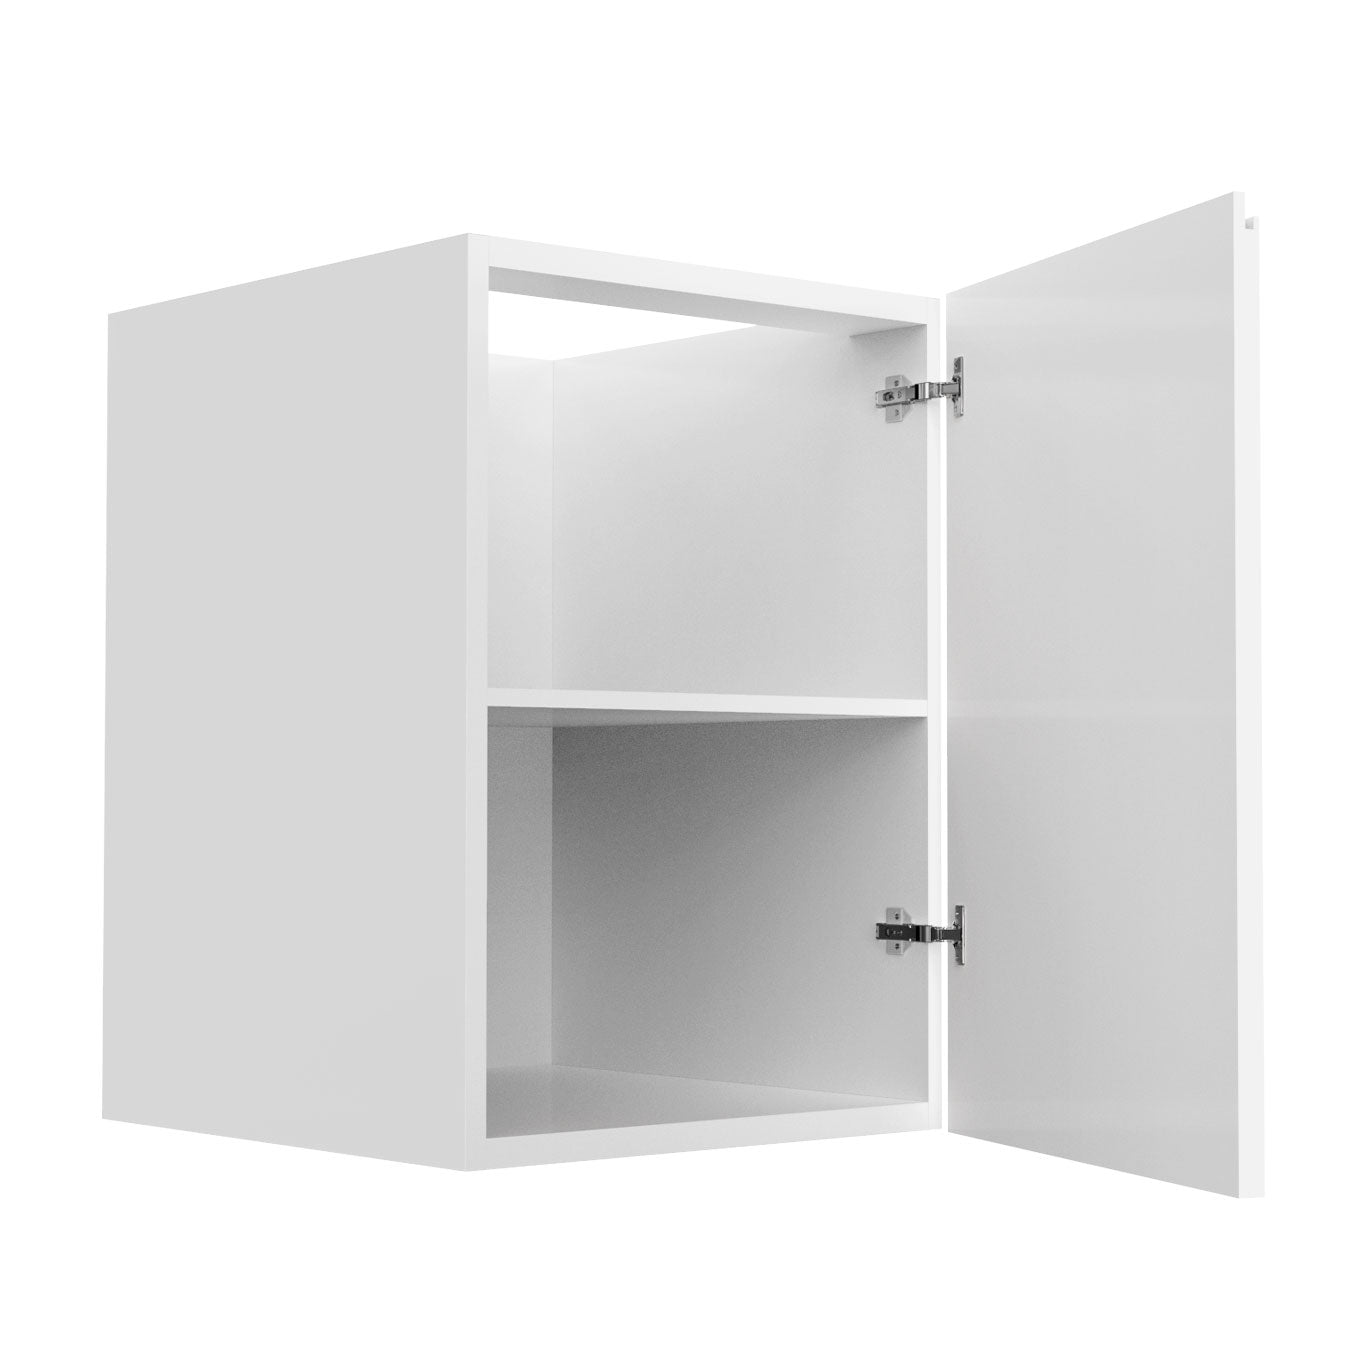 Kitchen Cabinet - RTA - Lacquer White - Full Height Kitchen Cabinet - Single Door Base | 21"W x 34.5"H x 23.8"D